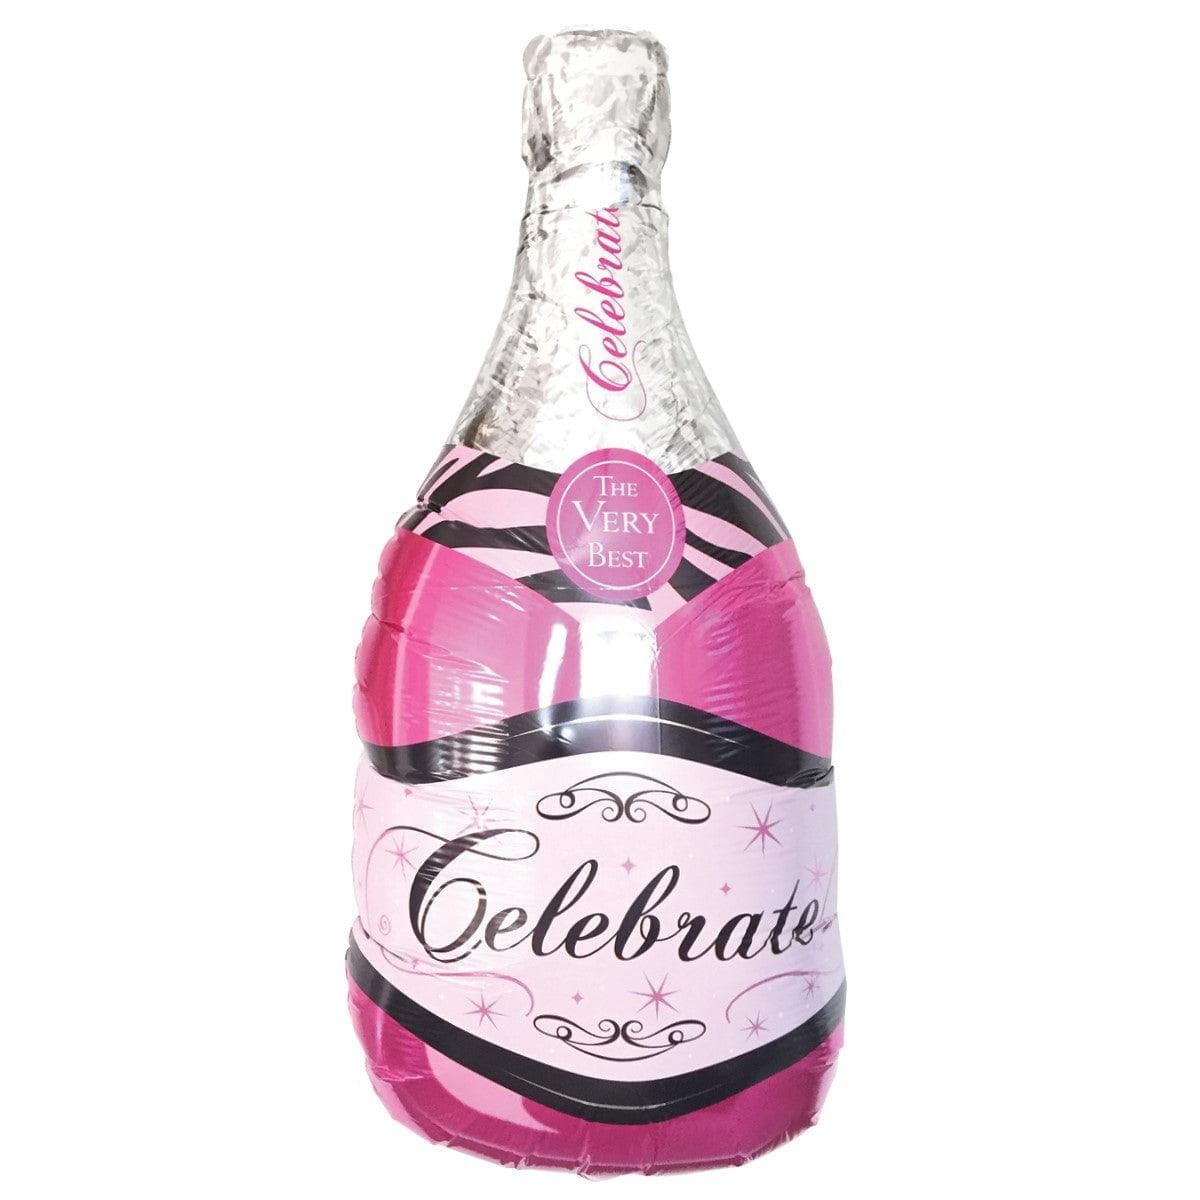 PARTY EXPERT Balloons Pink Champagne Bottle Supershape Foil Balloon